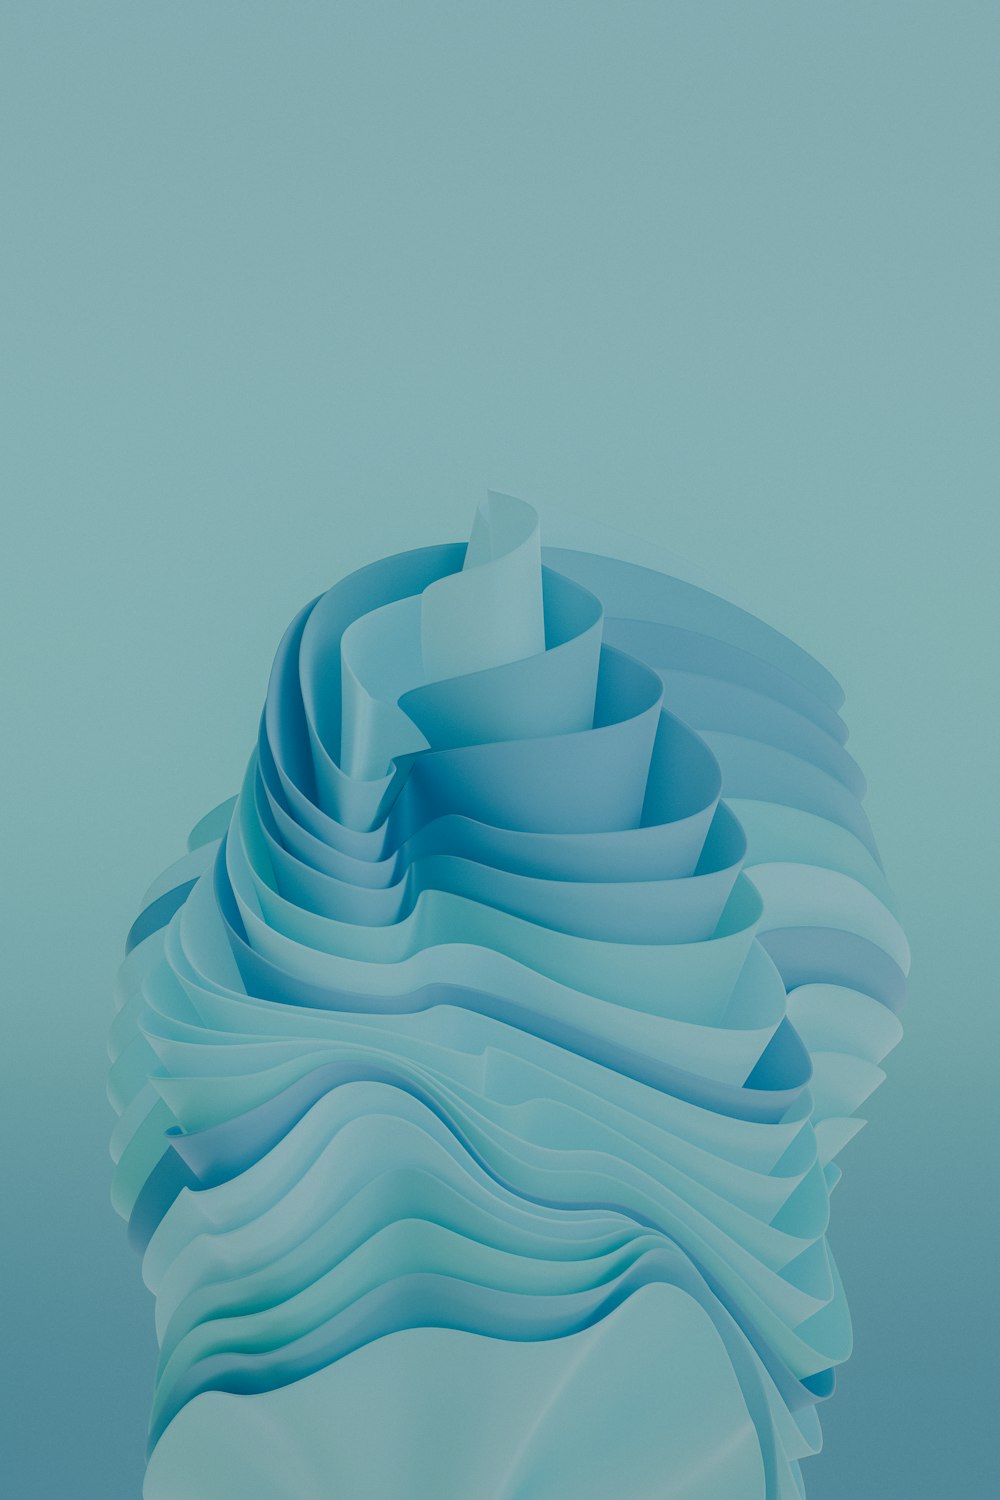 a blue abstract sculpture with wavy shapes